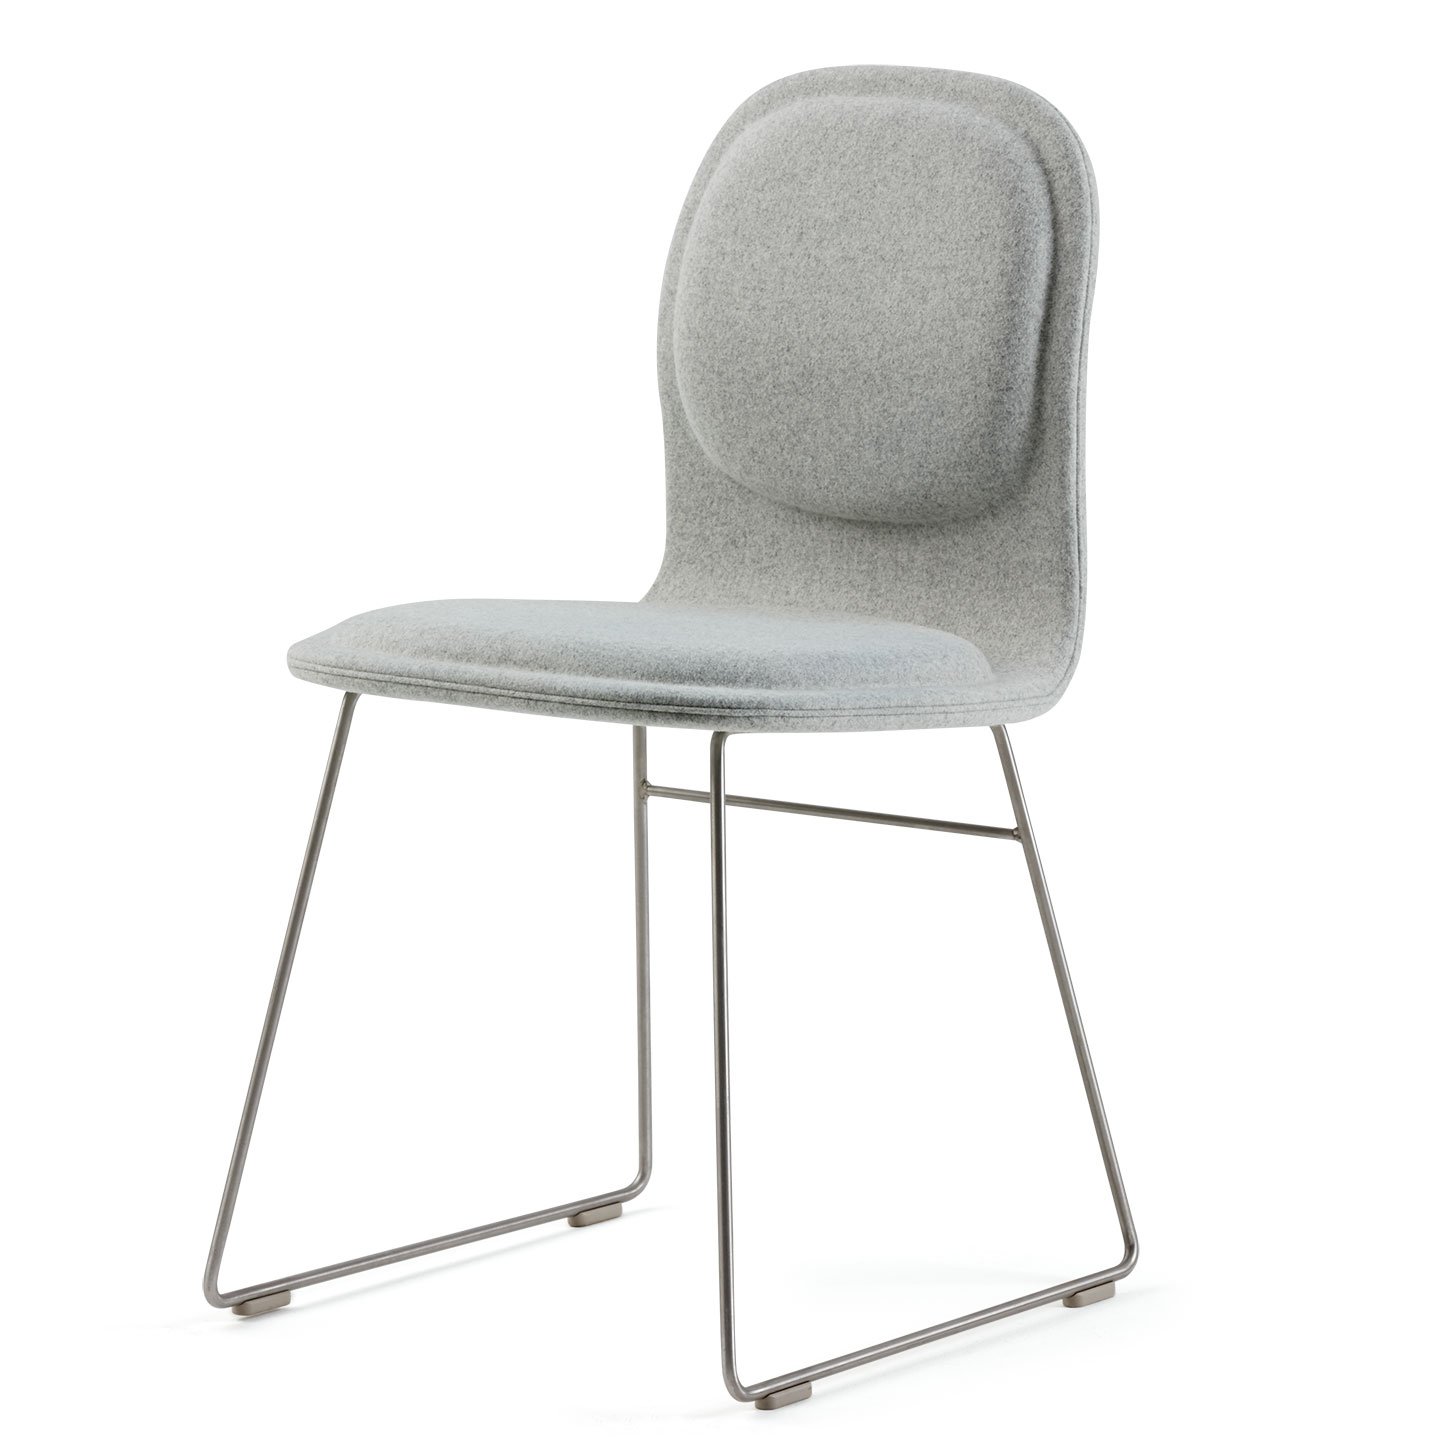 Haworth Hi Pad chair in grey upholstery in a side view